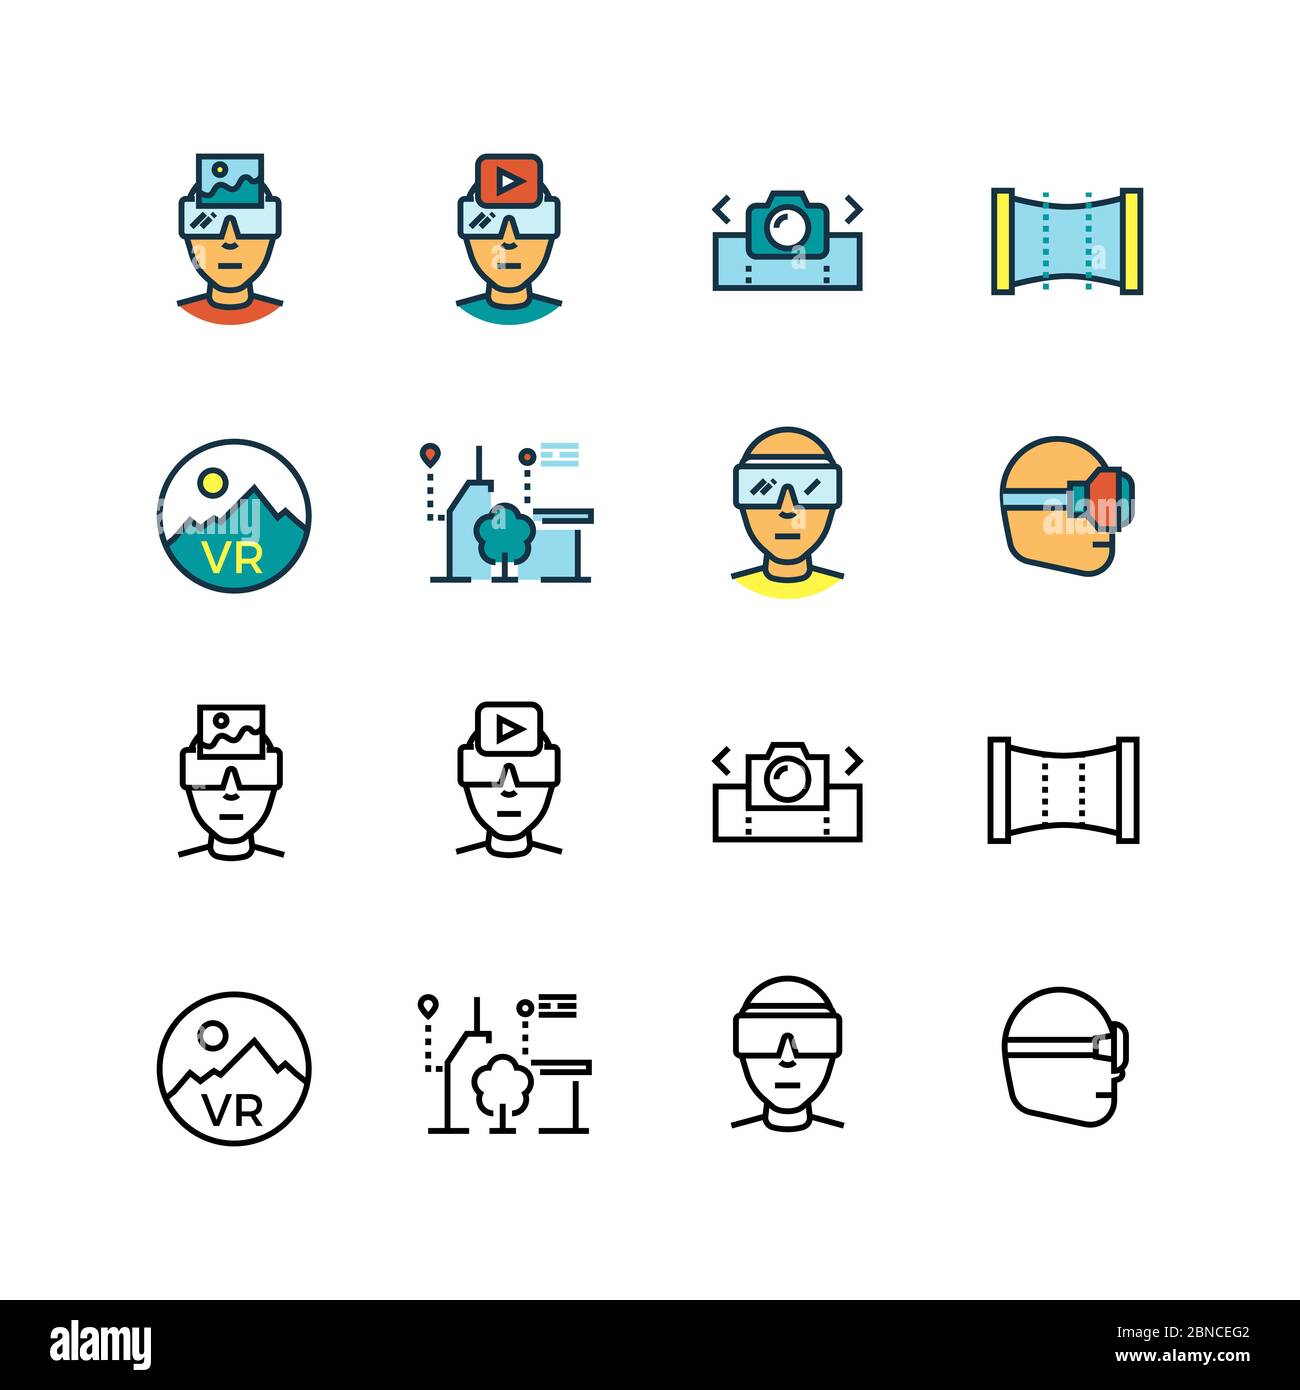 Virtual reality, virtual computer, visual communication innovation future technologies thin line icons vector set. Ilustration of virtual reality device, glasses game video Stock Vector